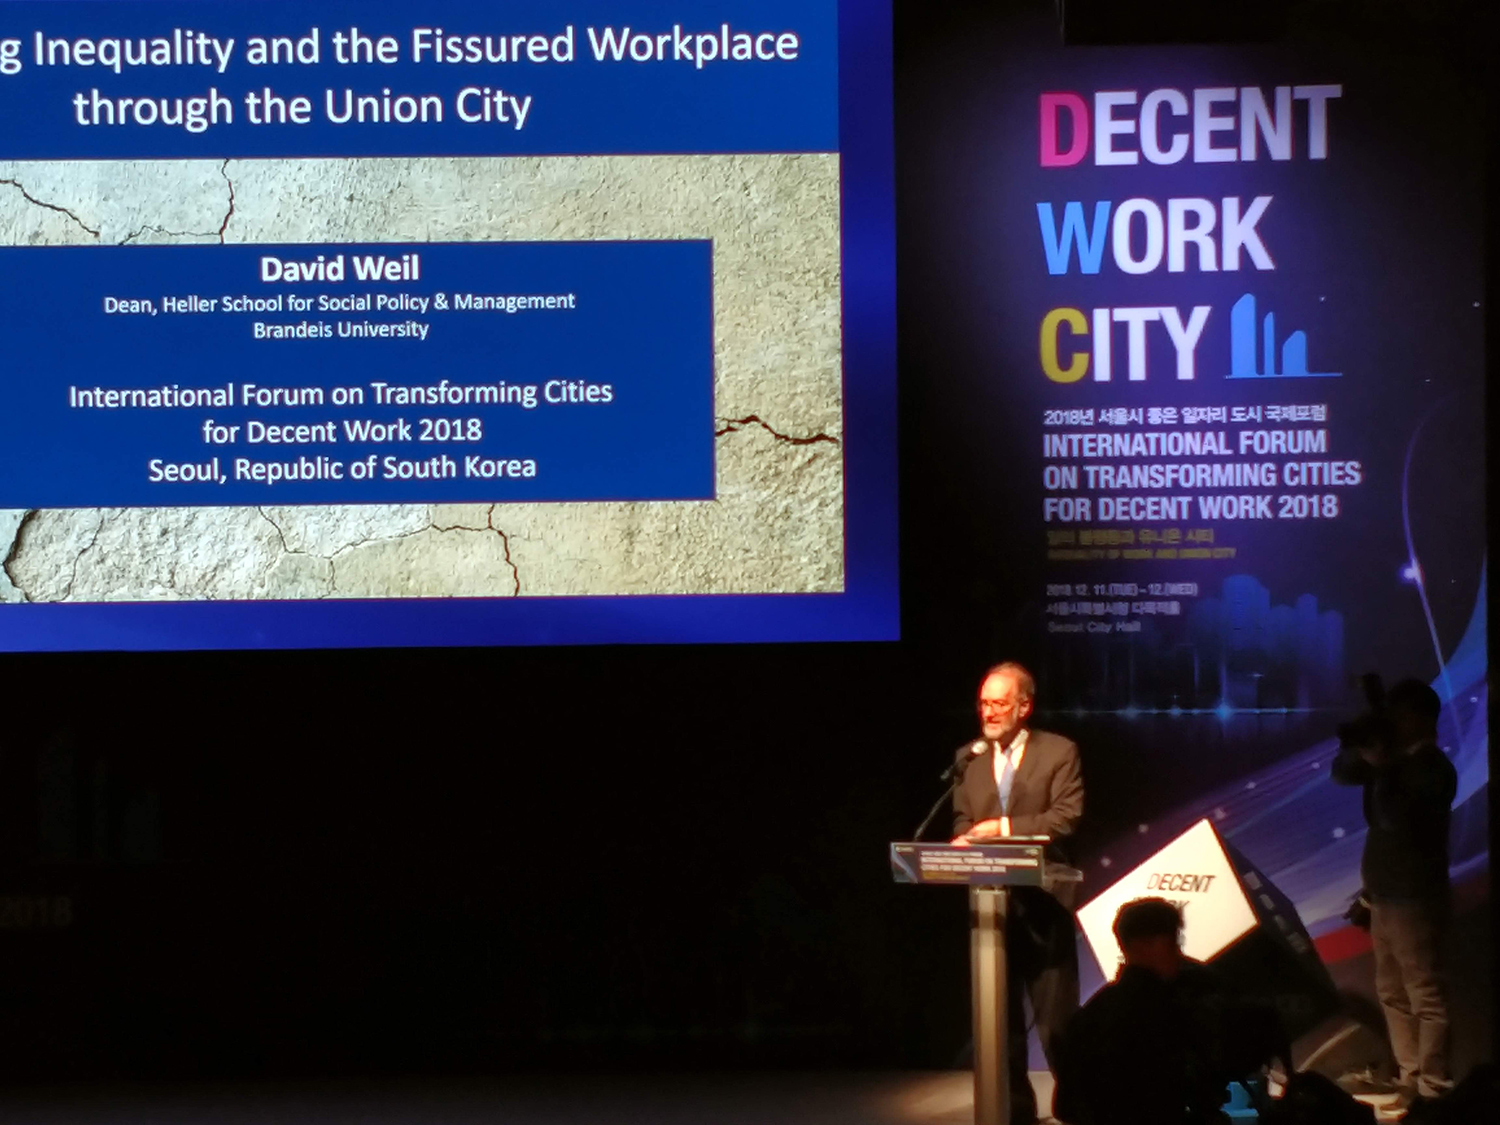 Dean David Weil delivers keynote at international labor forum and meets mayor of Seoul